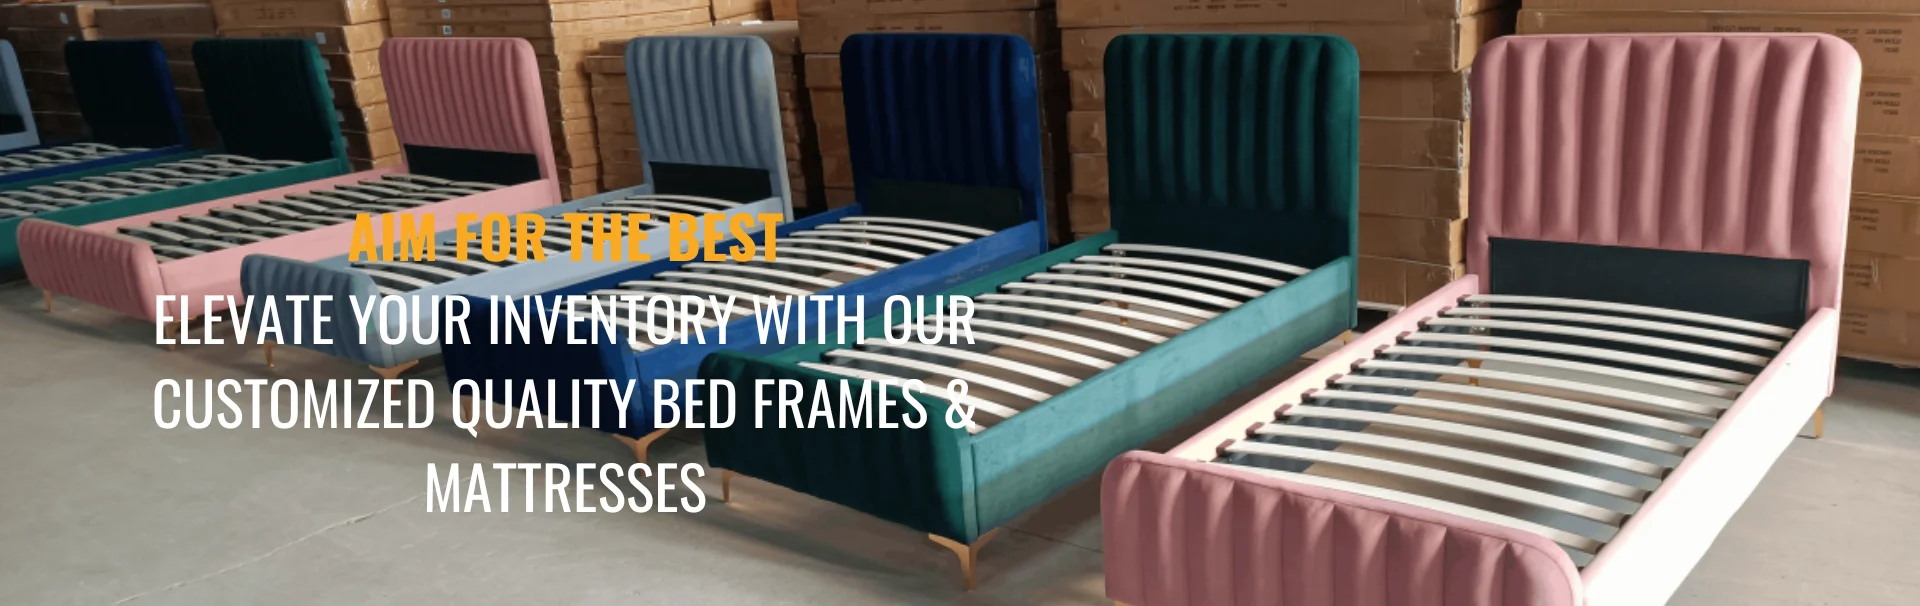 ELEVATE YOUR INVENTORY WITH OUR CUSTOMIZED QUALITY BED FRAMES & MATTRESSES